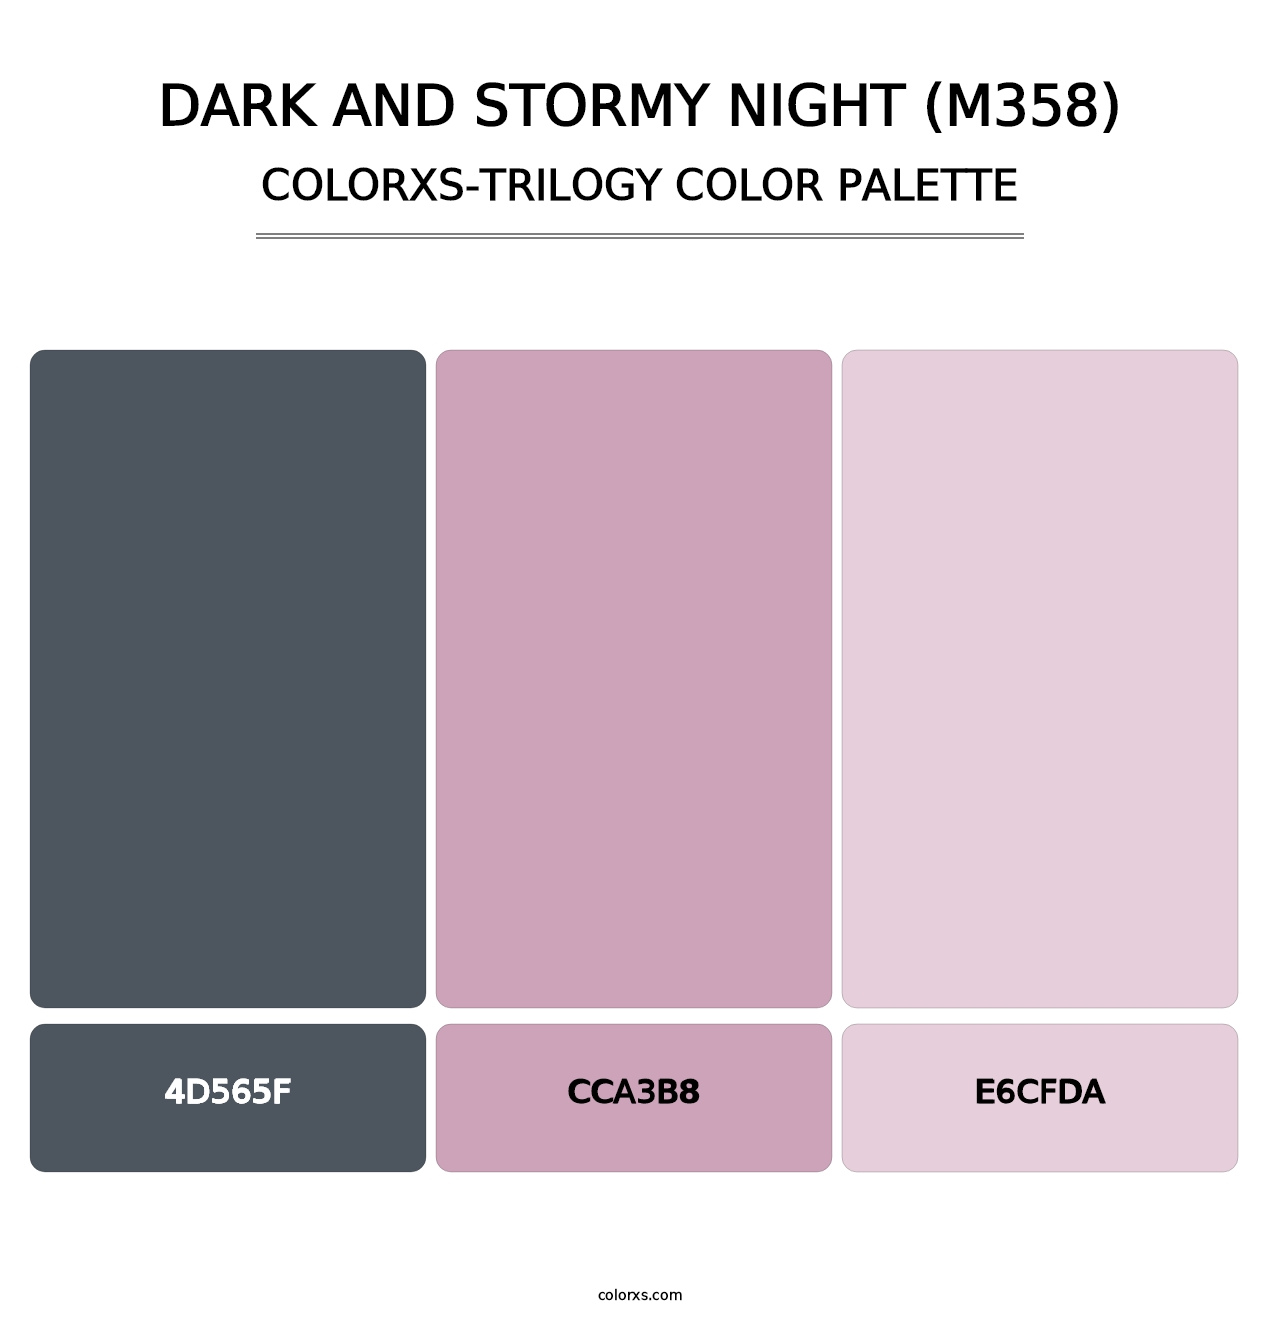 Dark and Stormy Night (M358) - Colorxs Trilogy Palette